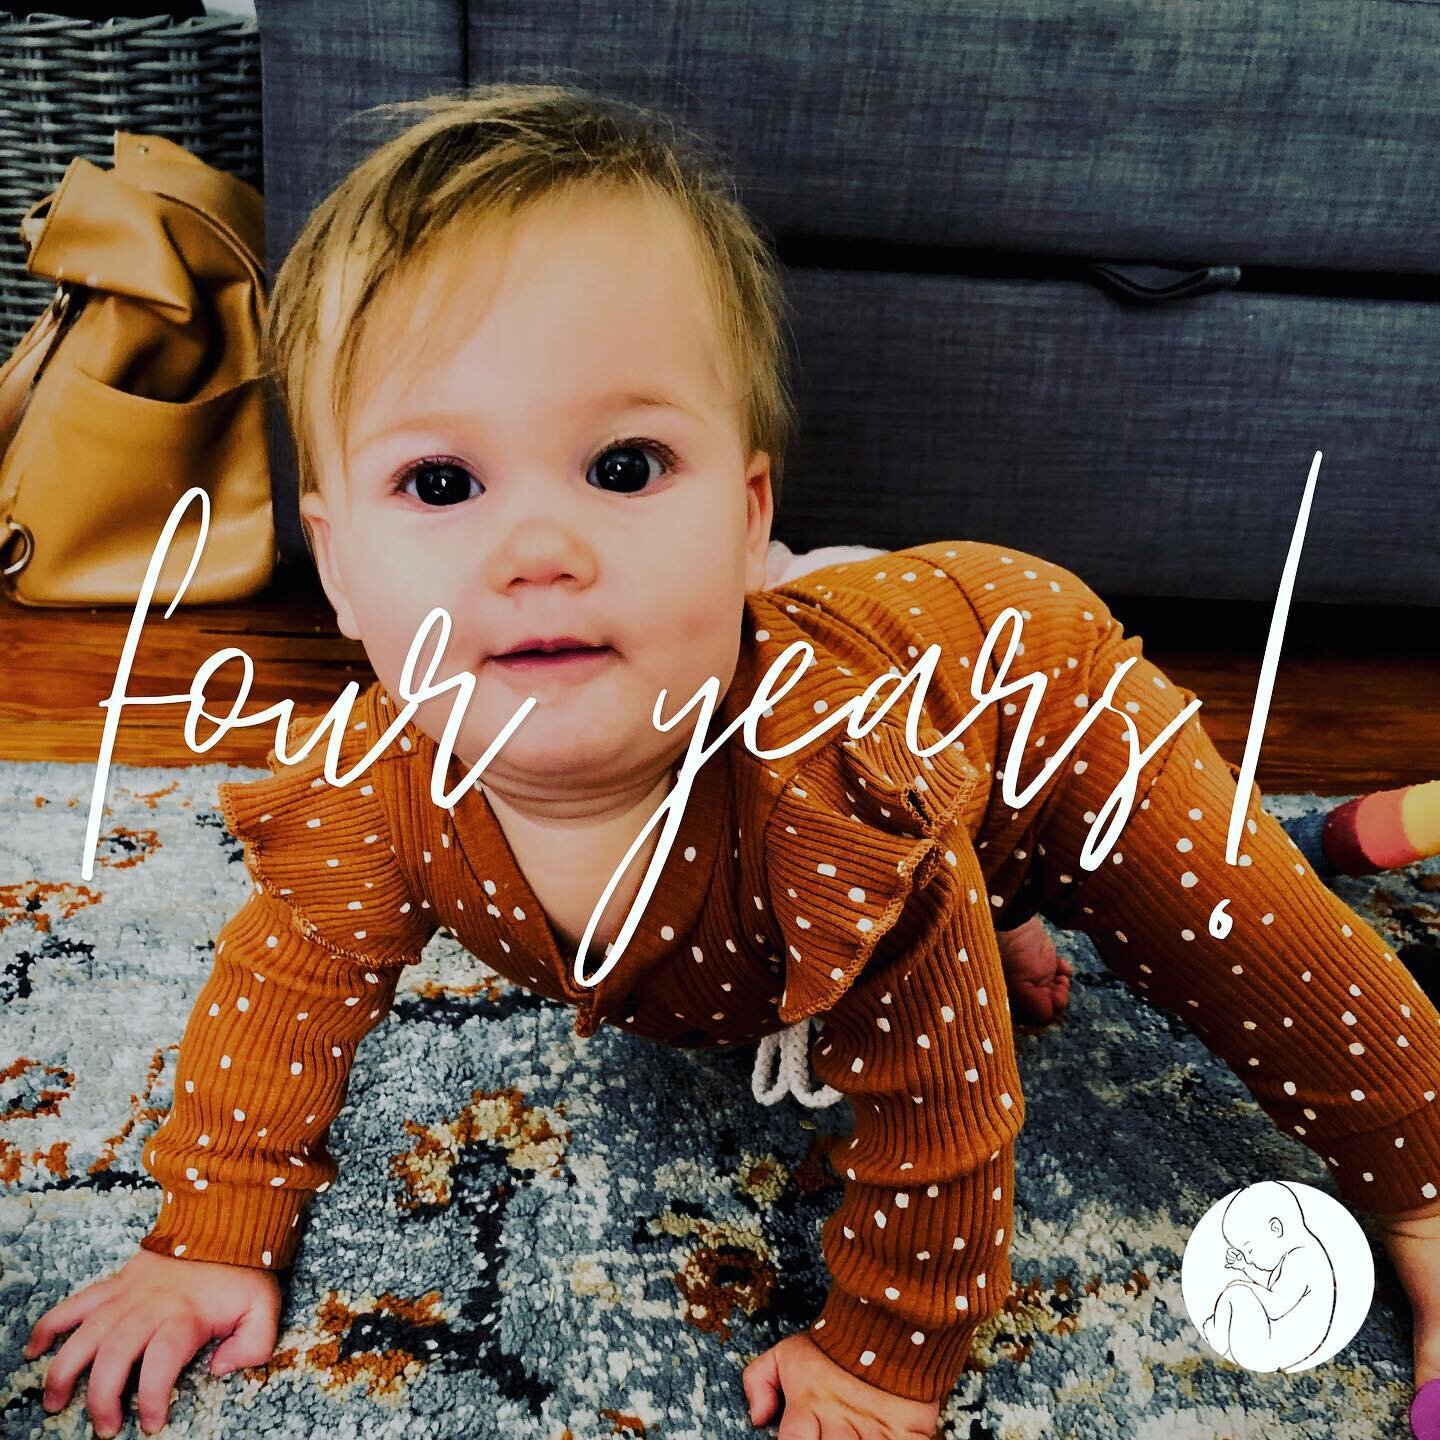 Just shy of four years ago, North Texas Midwifery (Bethany Stricker Midwifery back then) went live on Instagram for the first time.

Now, thousands of pieces of content and hundreds of births later&hellip; we are still as happy to be here engaging wi